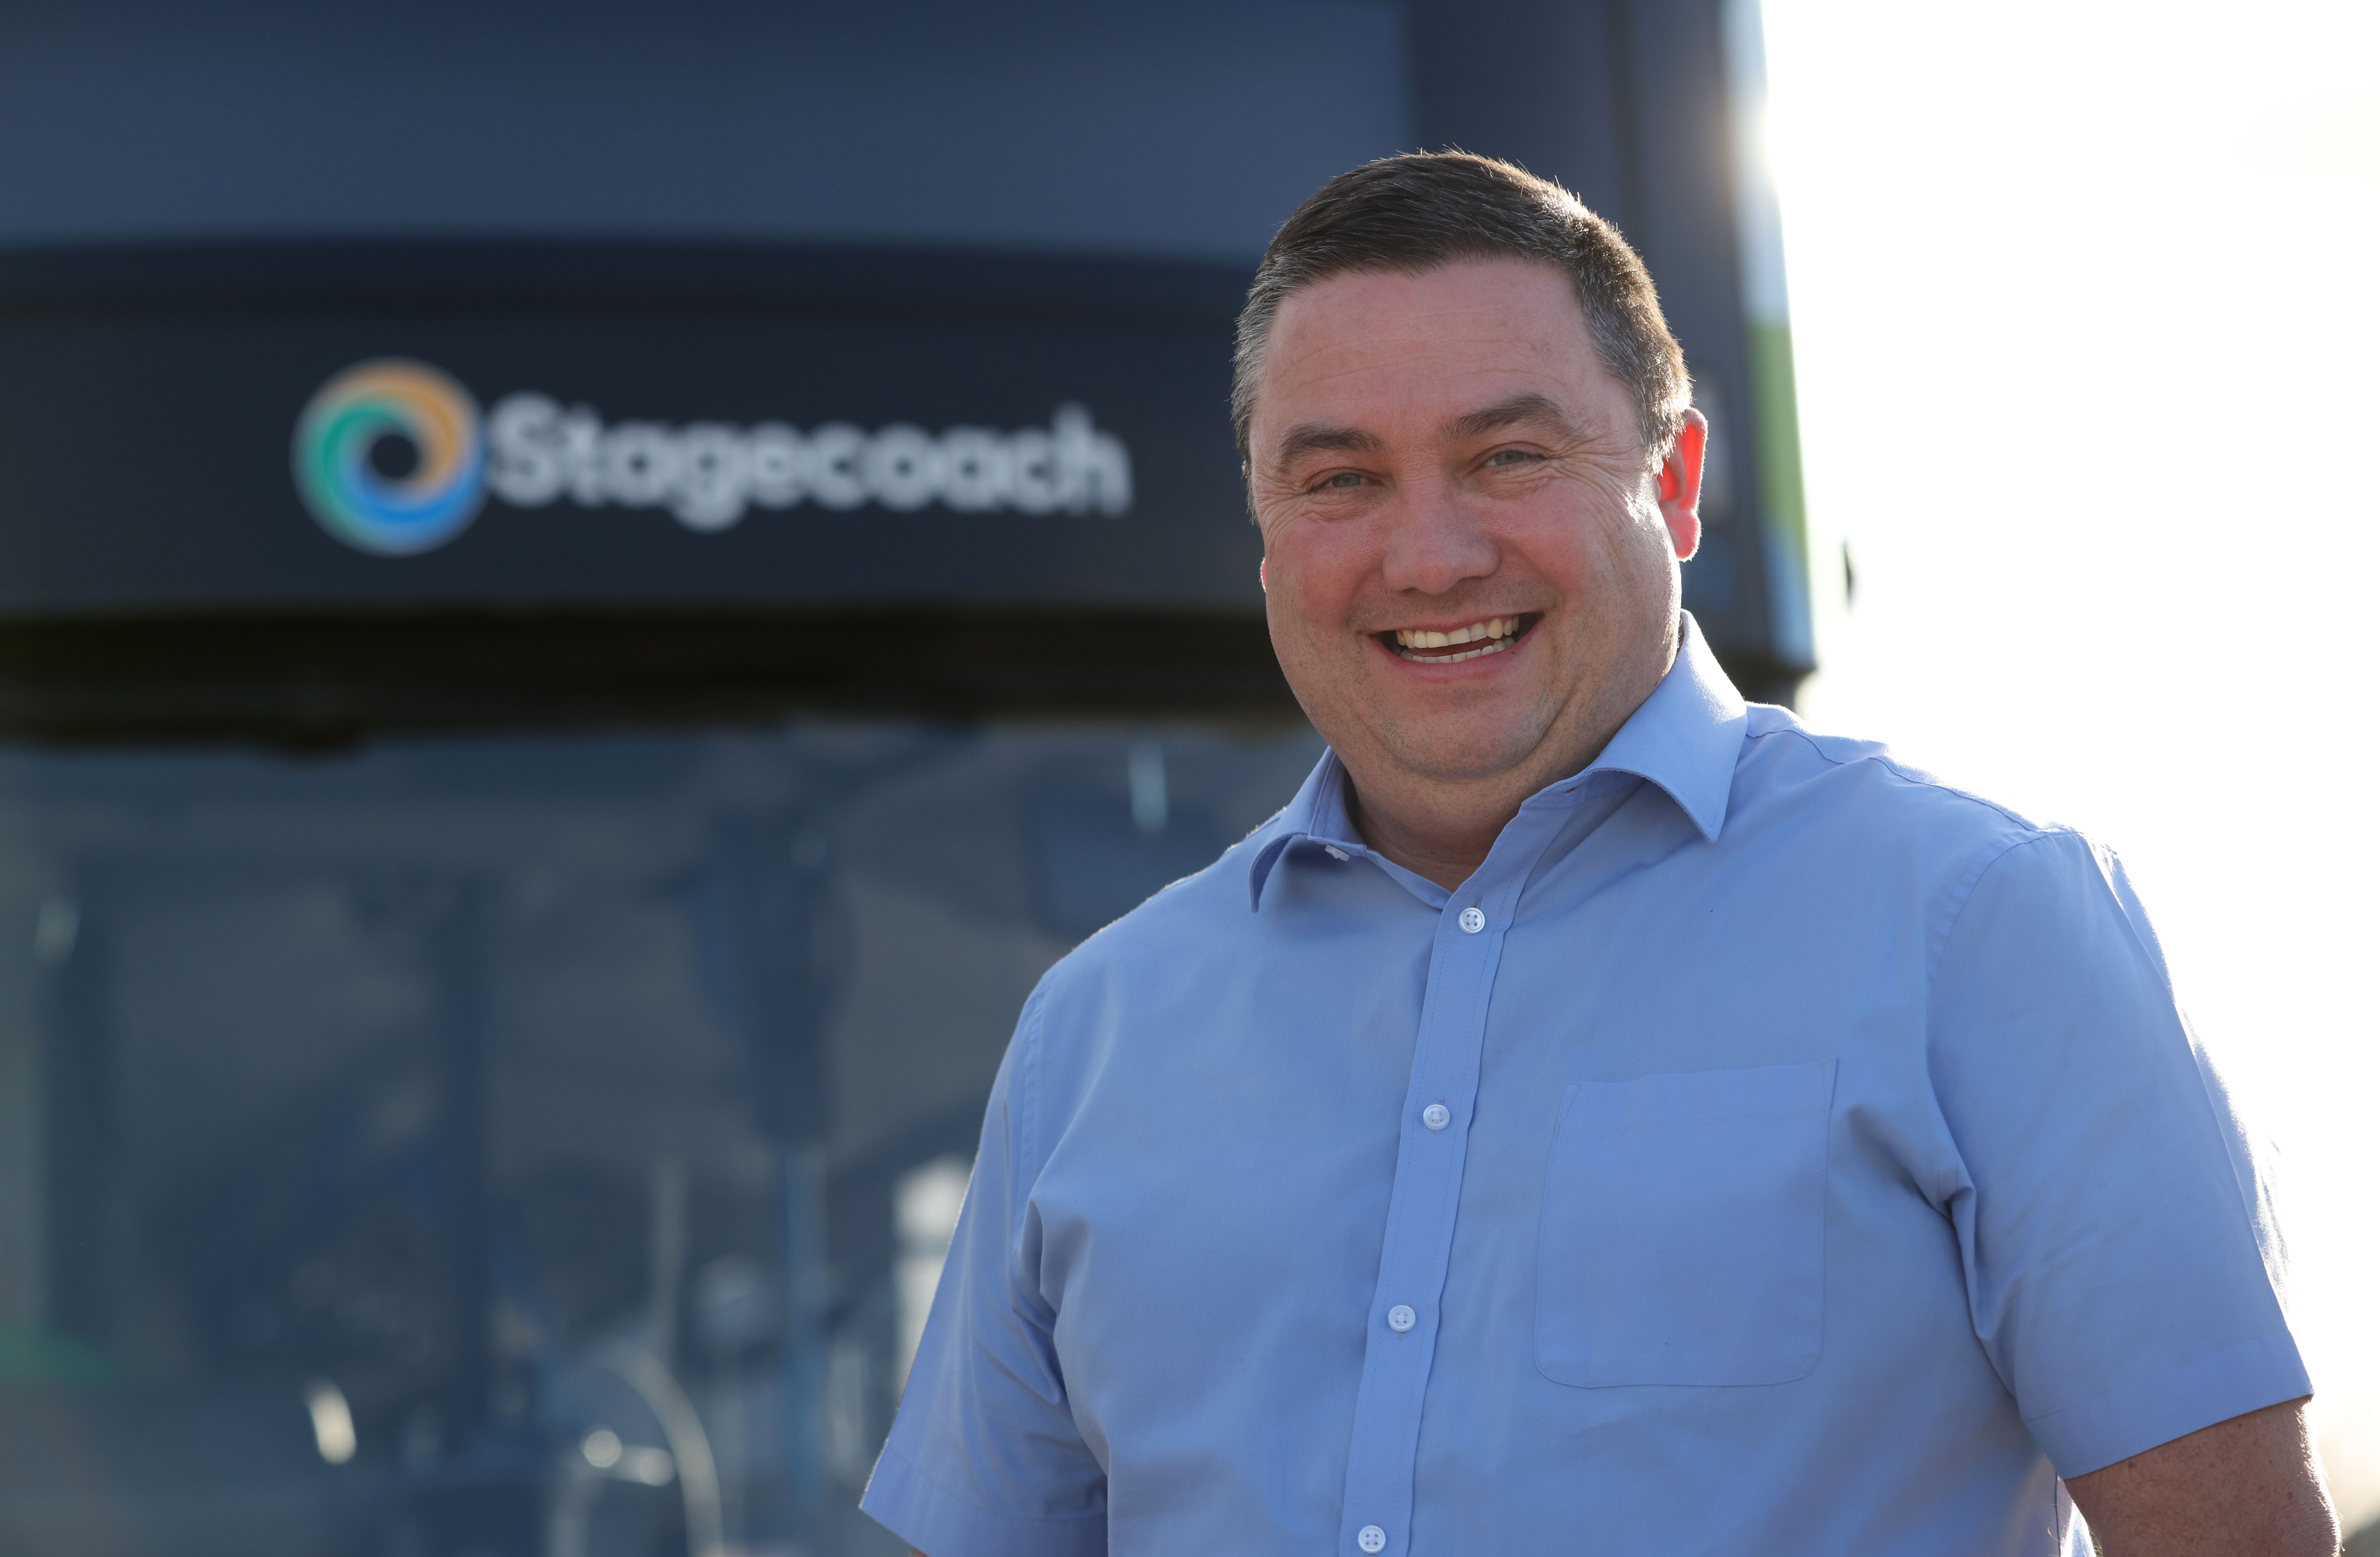 VIDEO: Stagecoach East highlights support team